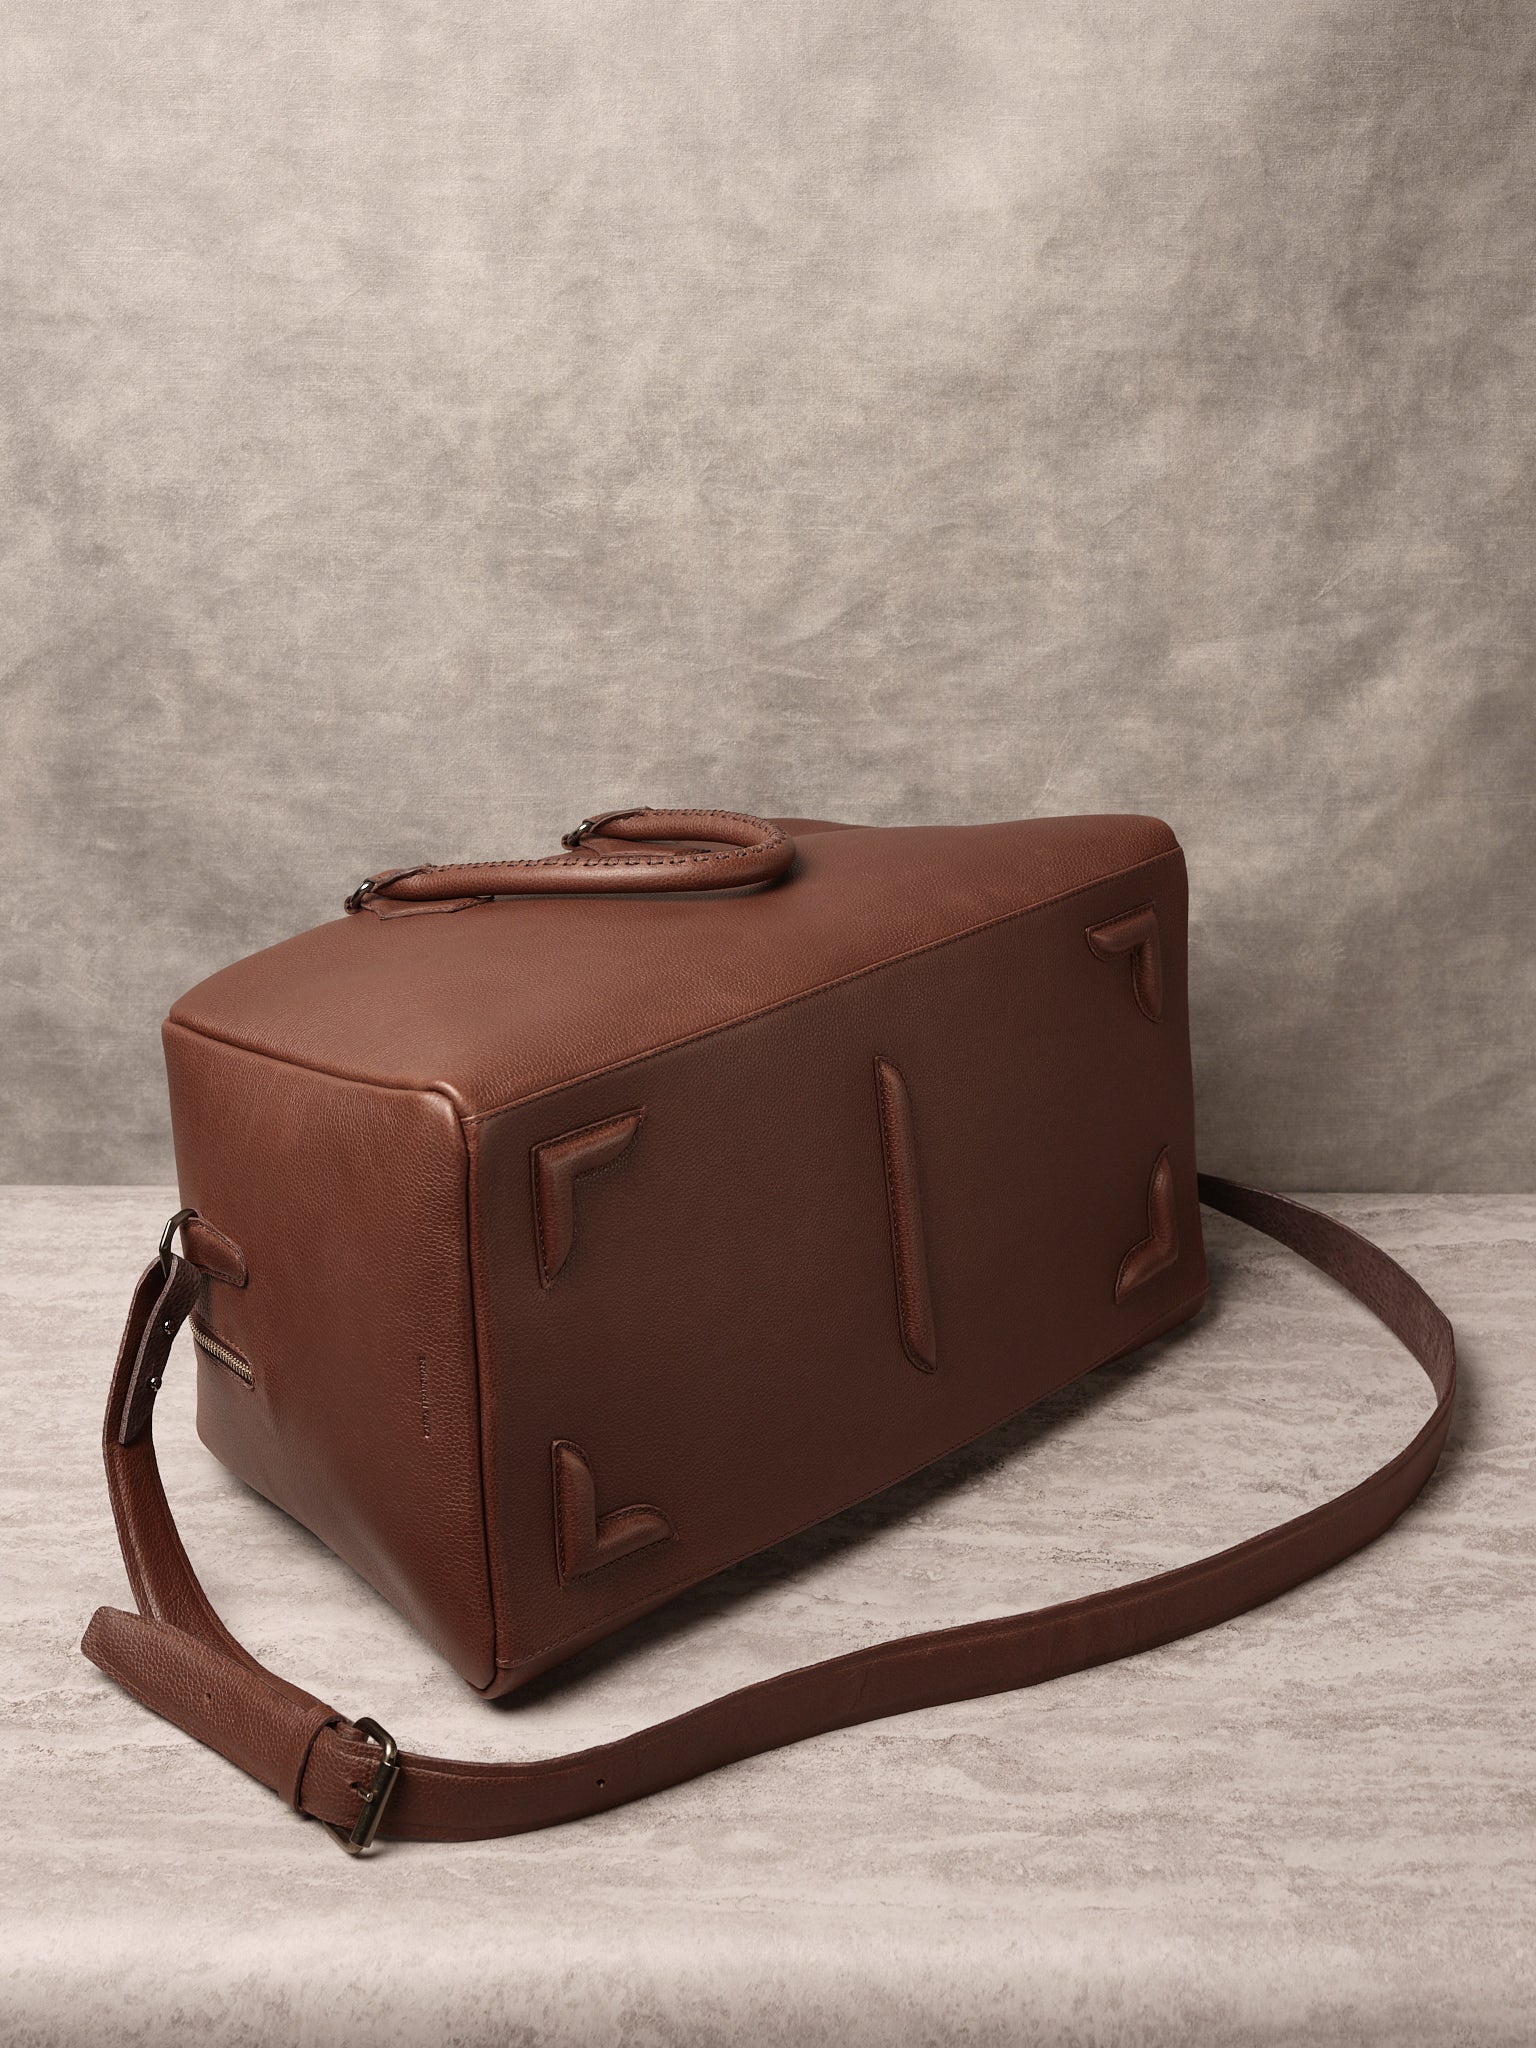 Leather Feet. Designer Duffle Bags Brown by Capra Leather